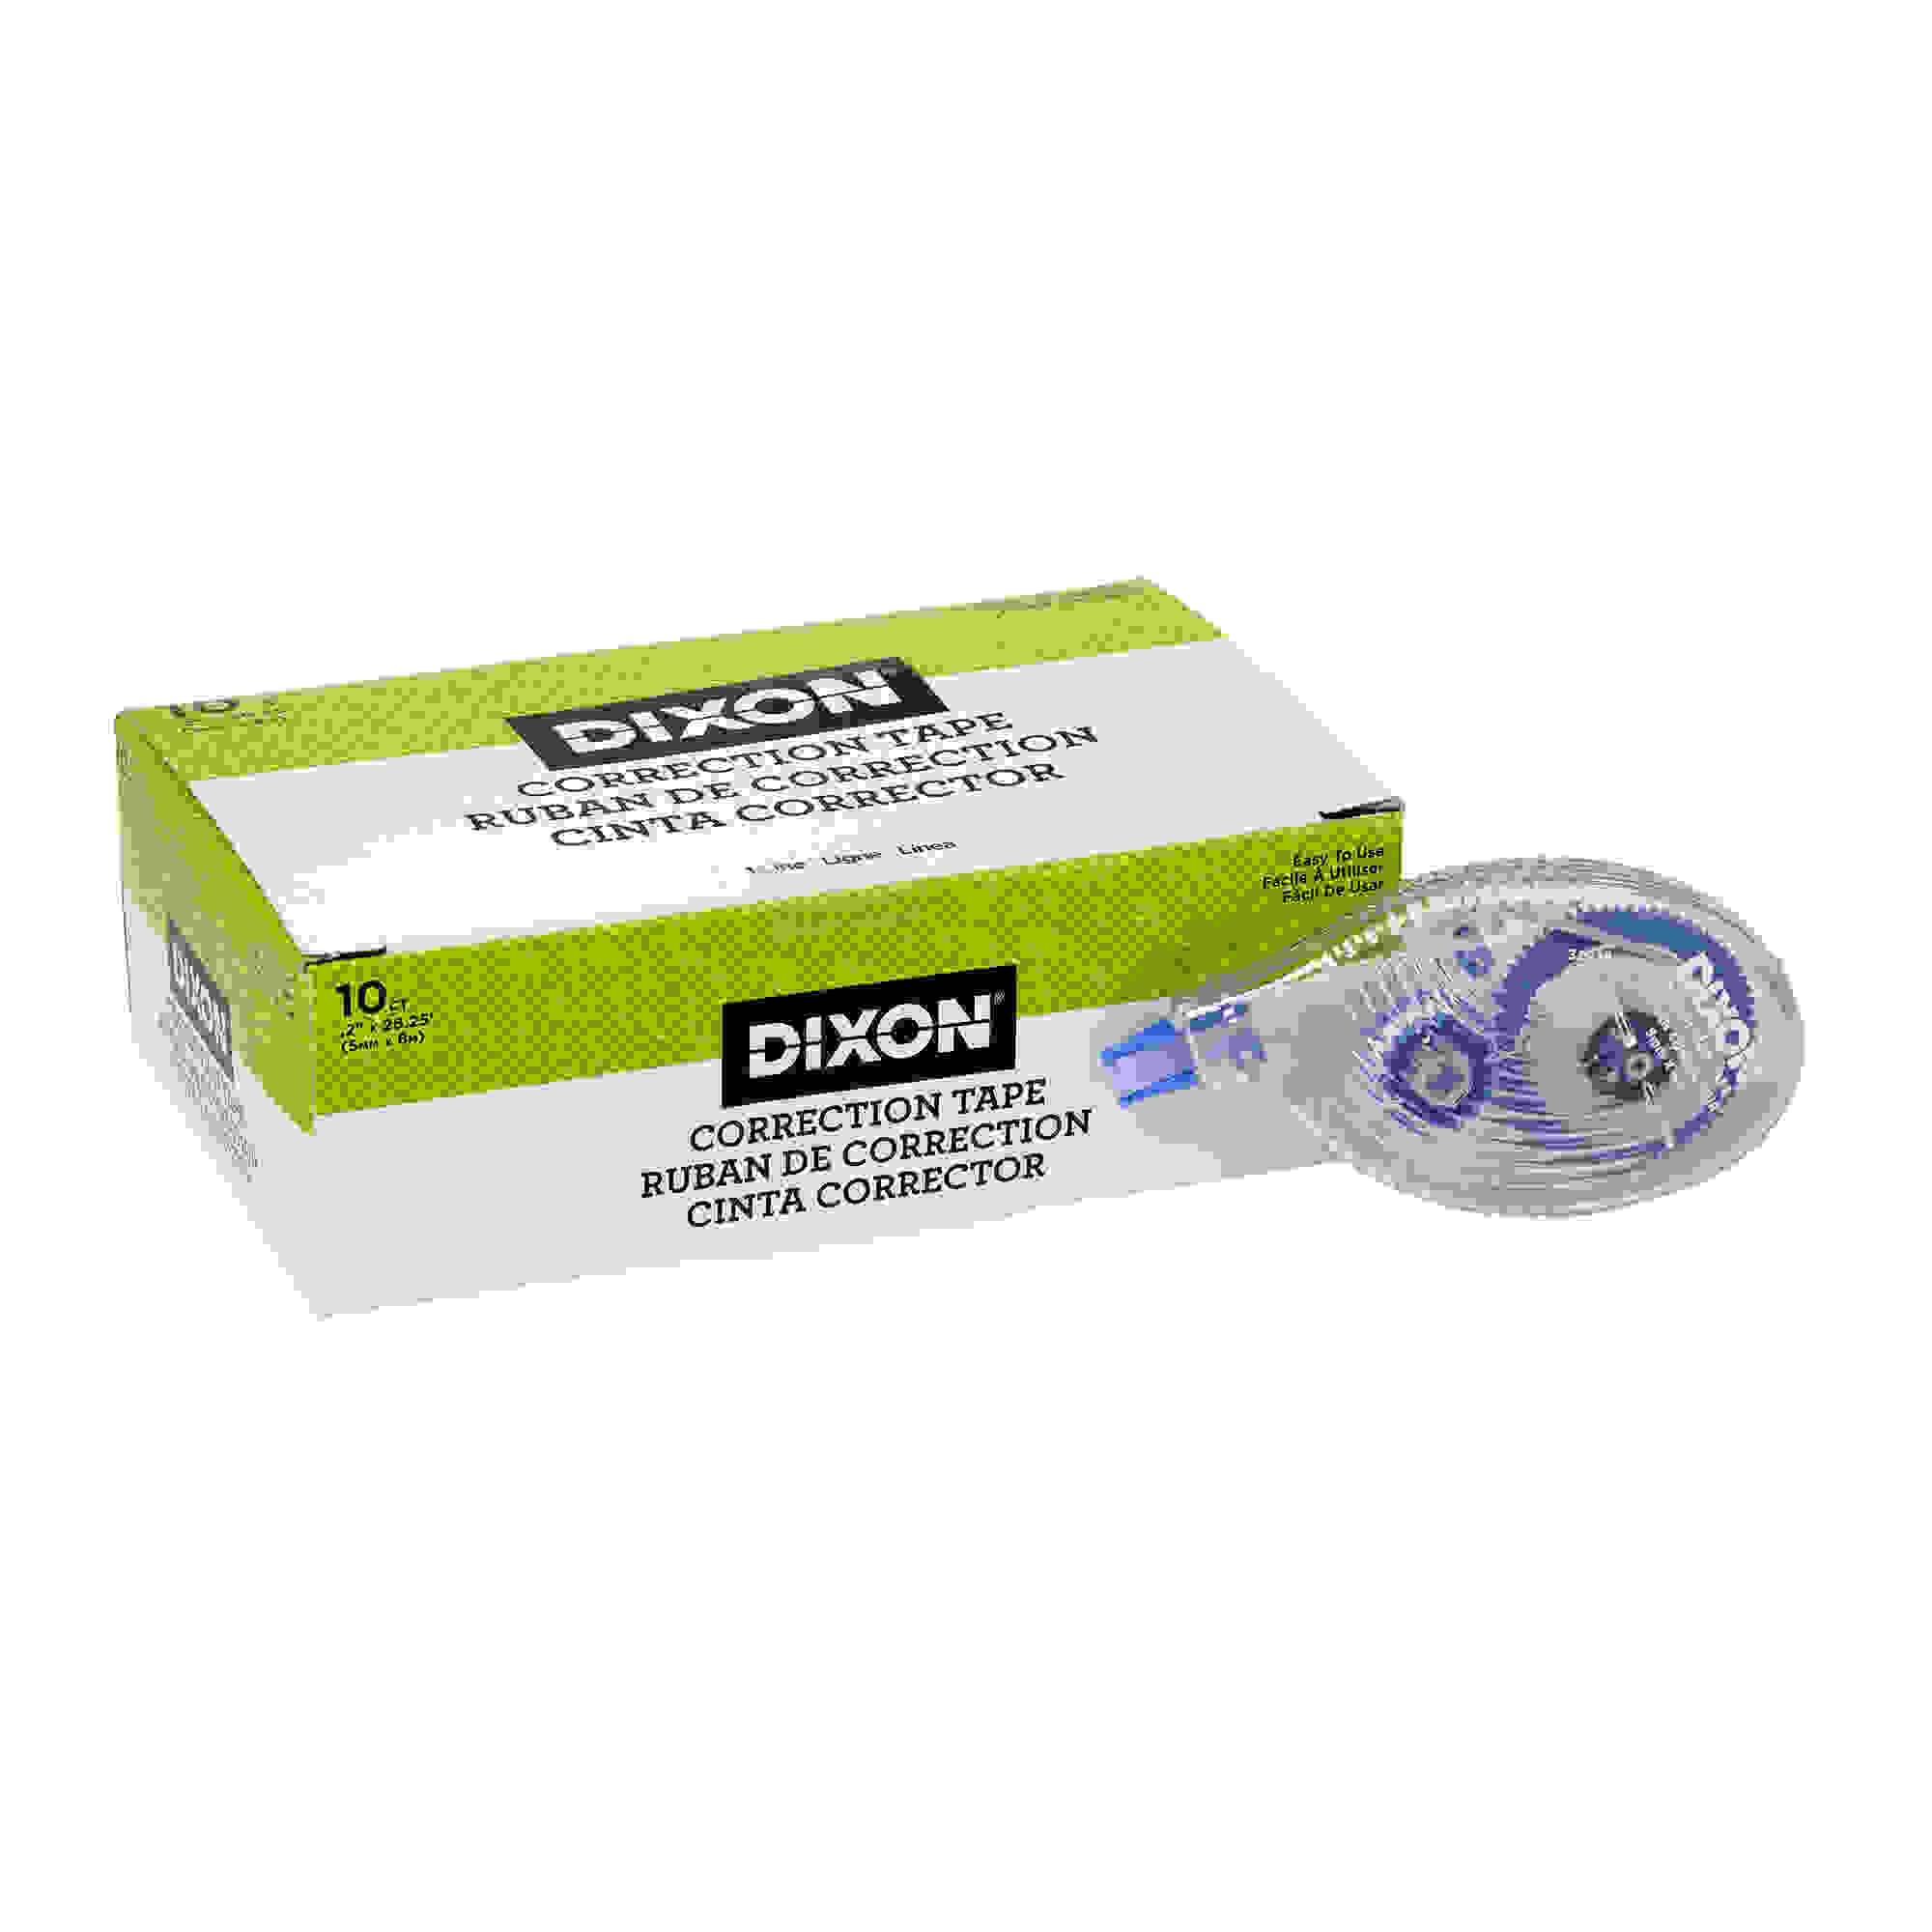 Correction Tape, 1 Line, 10 Count